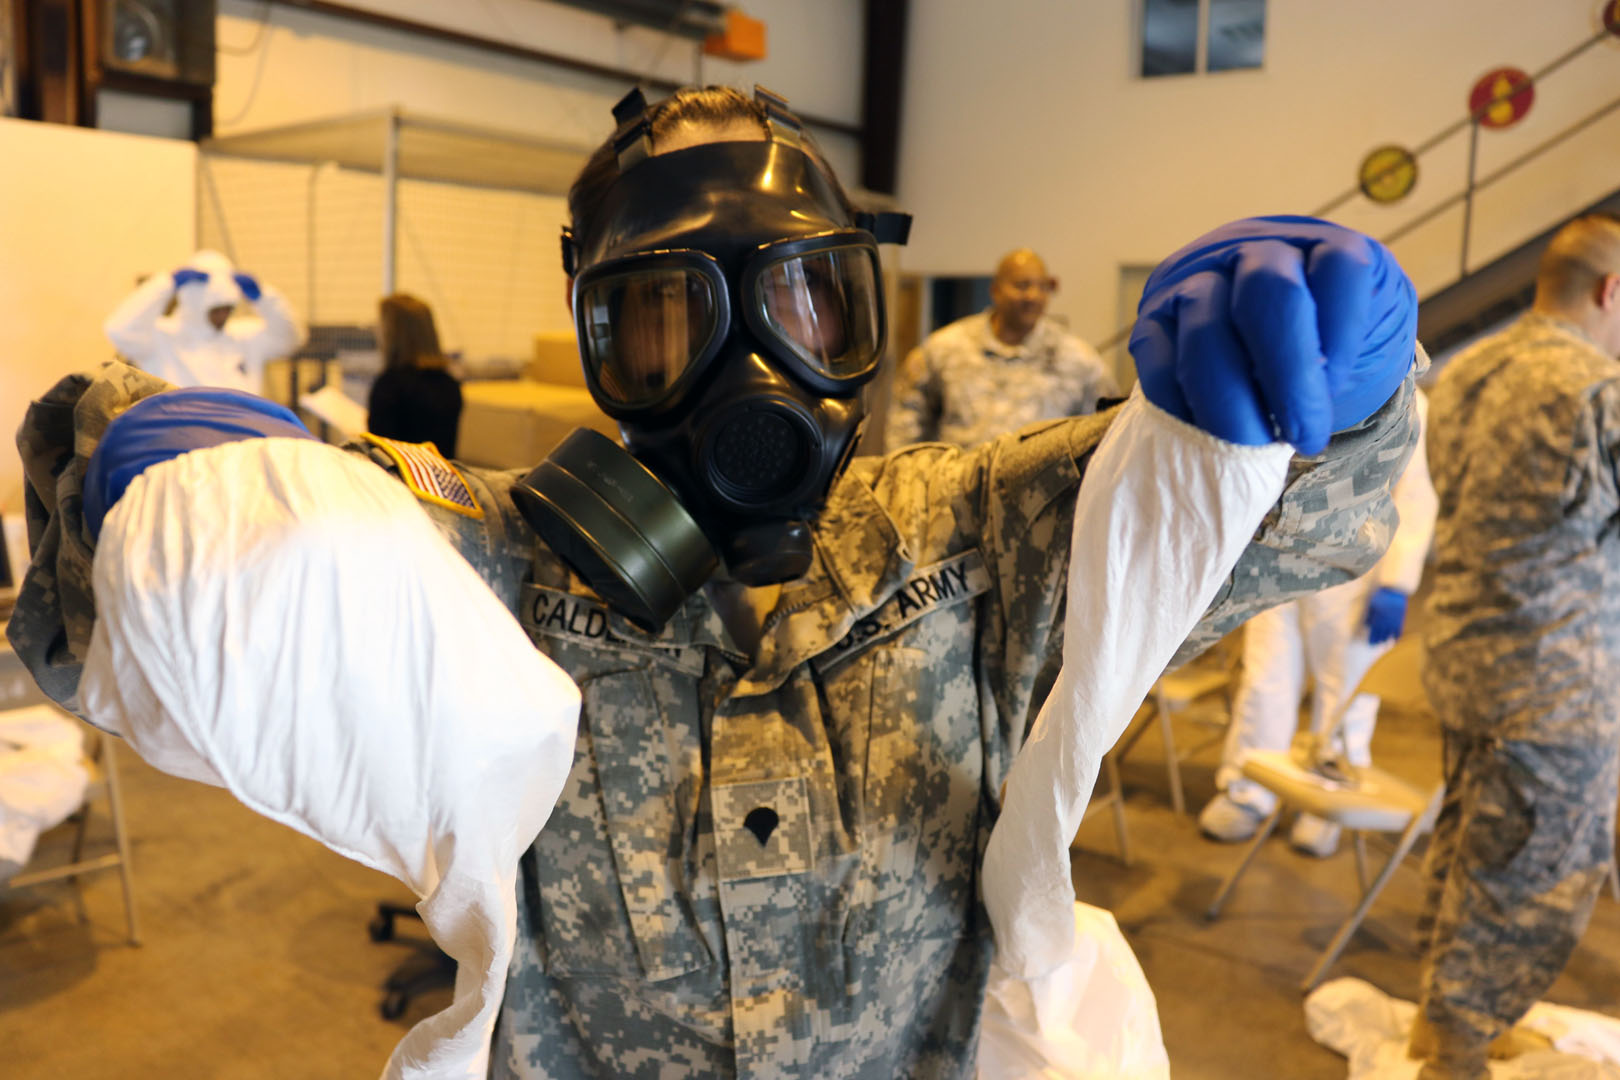 Spc. Kristal Calderon, an information technology support specialist with the 35th Signal Brigade (Theater Tactical) at Fort Gordon, Ga., practices carefully donning and removing personal protective equipment during pre-deployment training at the brigade’s logistical warehouse at Fort Gordon. The training was mandatory for the Soldiers who deployed to Liberia in late October to add their communications equipment and expertise to the fight against the Ebola outbreak in West Africa. (Photo by Capt. Lindsay D. Roman/U.S. Army)